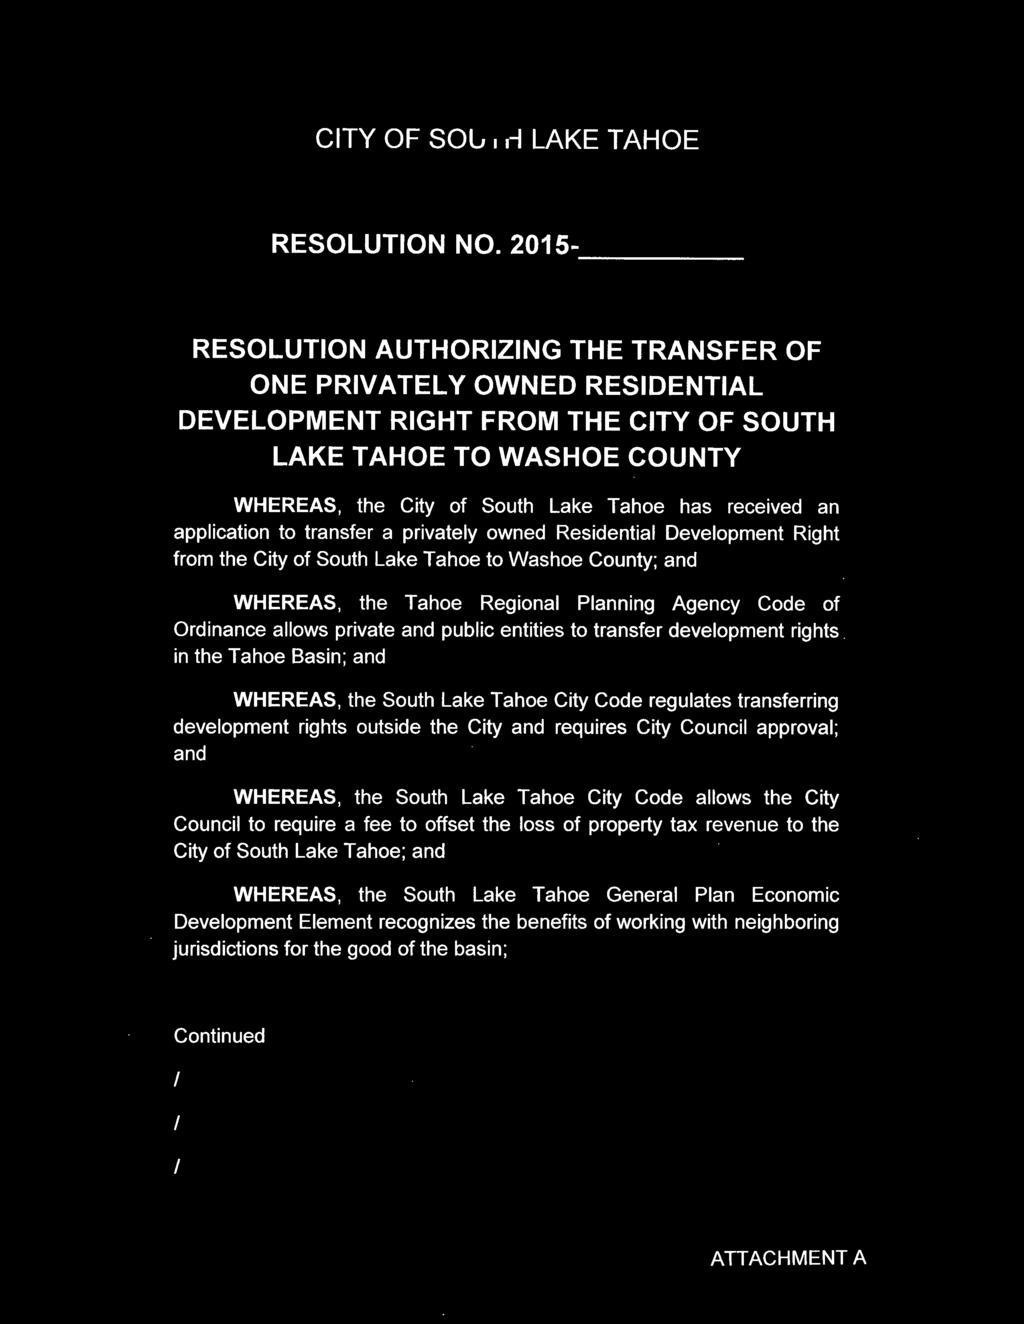 application to transfer a privately owned Residential Development Right from the City of South Lake Ta hoe to Washoe County; and WHEREAS, the Tahoe Regional Planning Agency Code of Ordinance allows